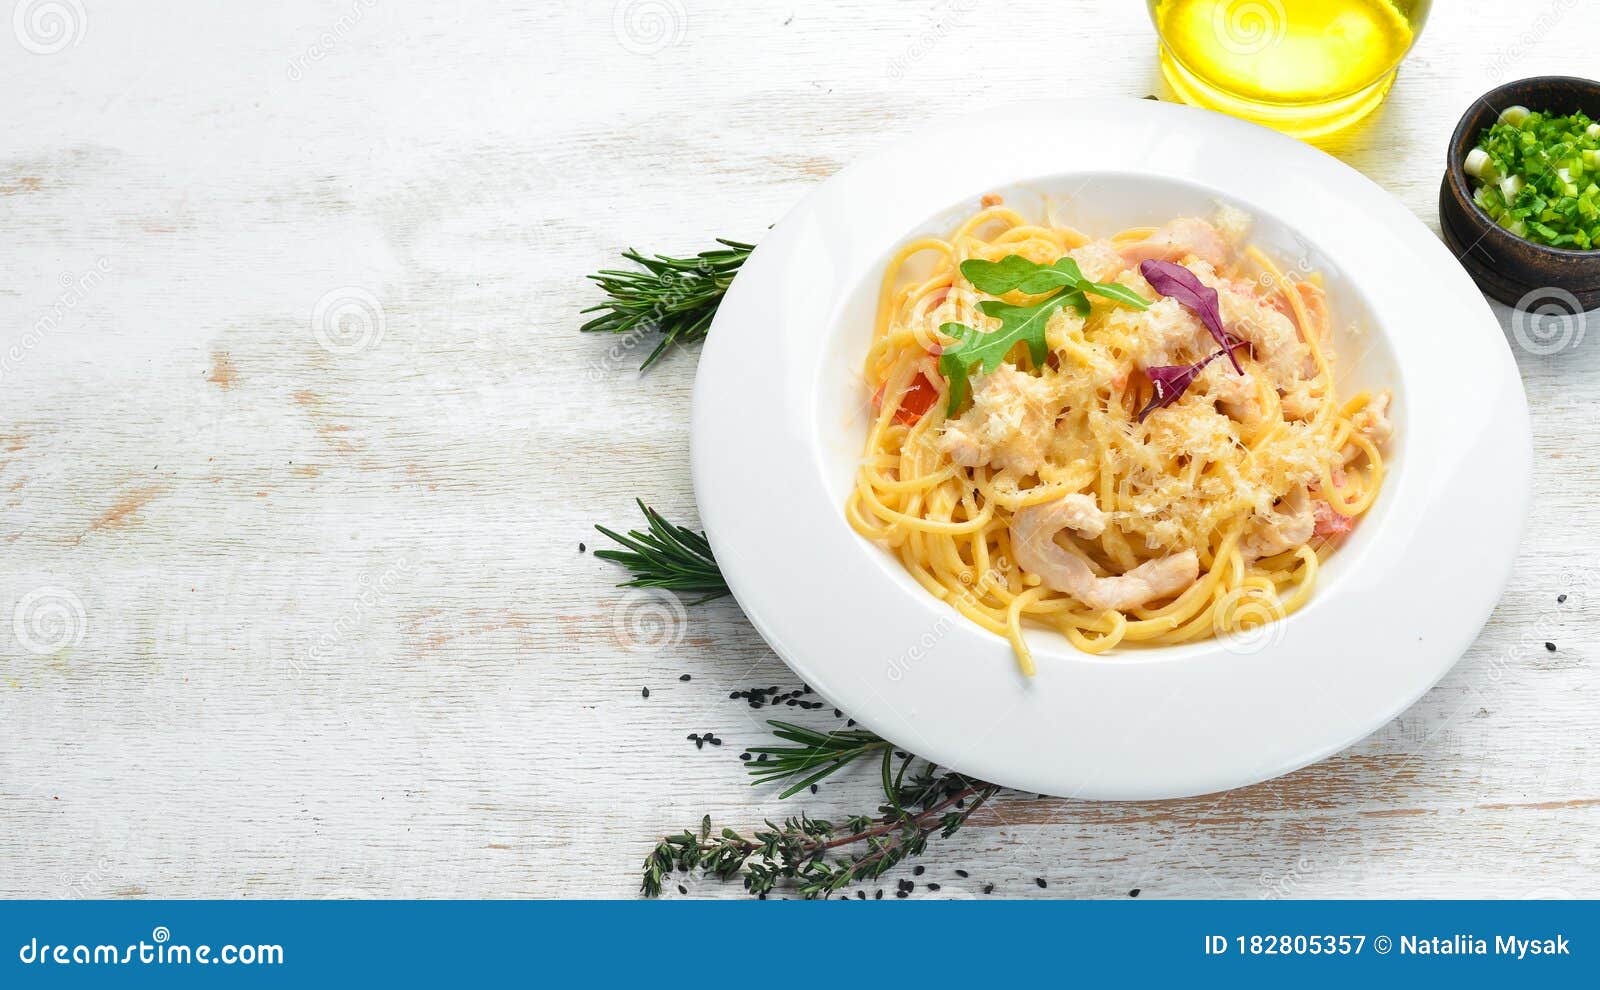 Pasta with Chicken Meat and Cheese. Italian Cuisine Stock Image - Image ...